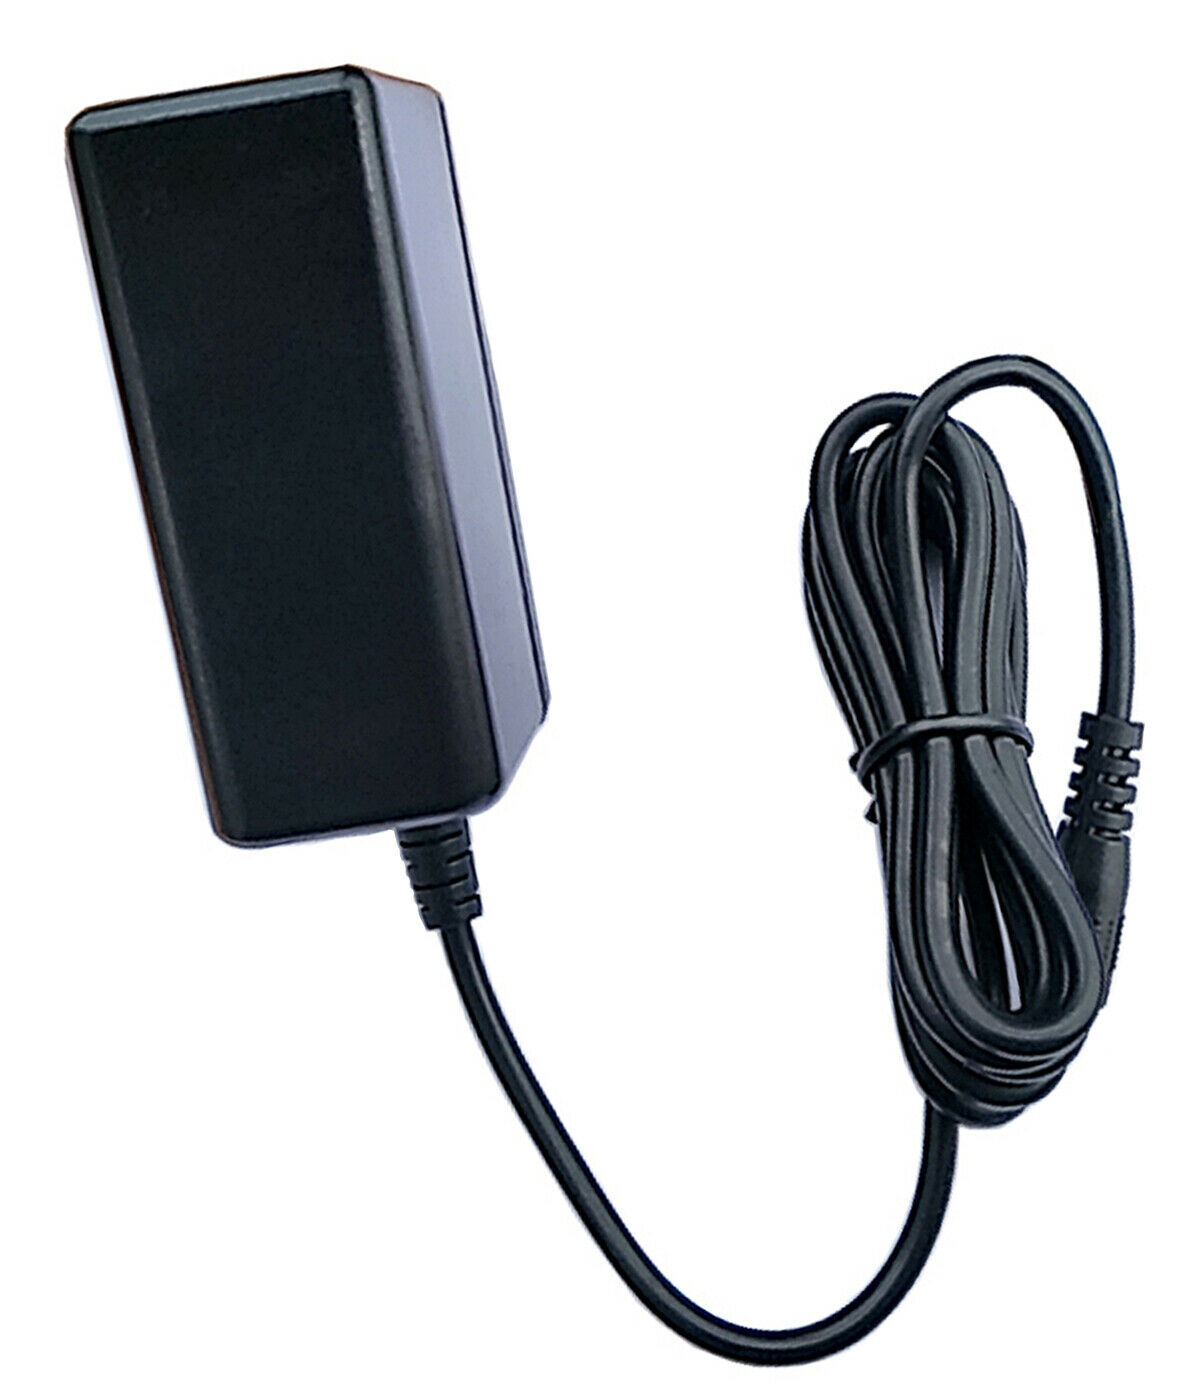 AC-DC Wall Adapter For 93001496 Hoover Transformer Battery Charger Power Supply Specifications: Type: AC to DC Standard